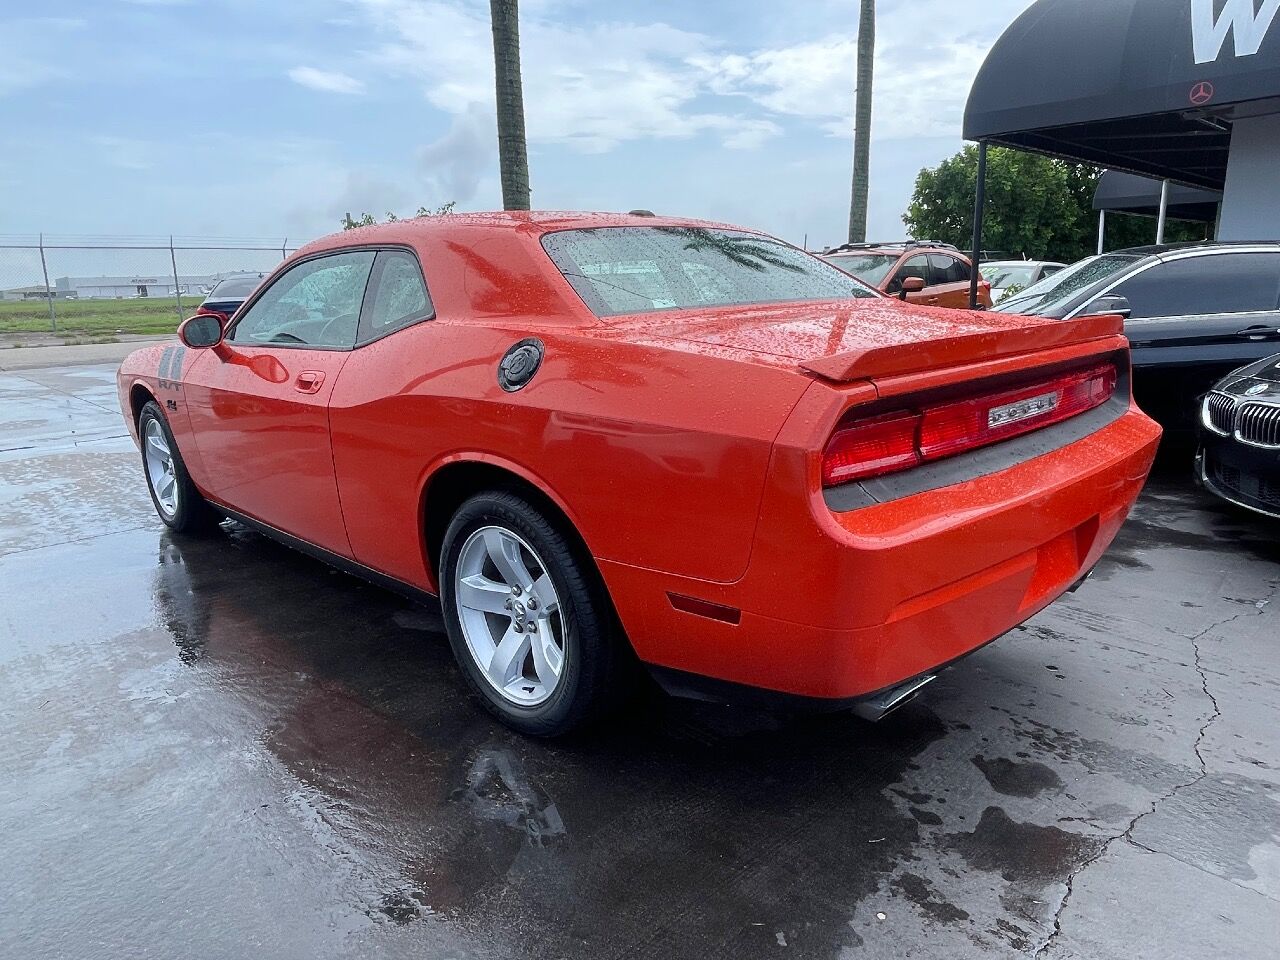 2010 DODGE Challenger Coupe - $16,690